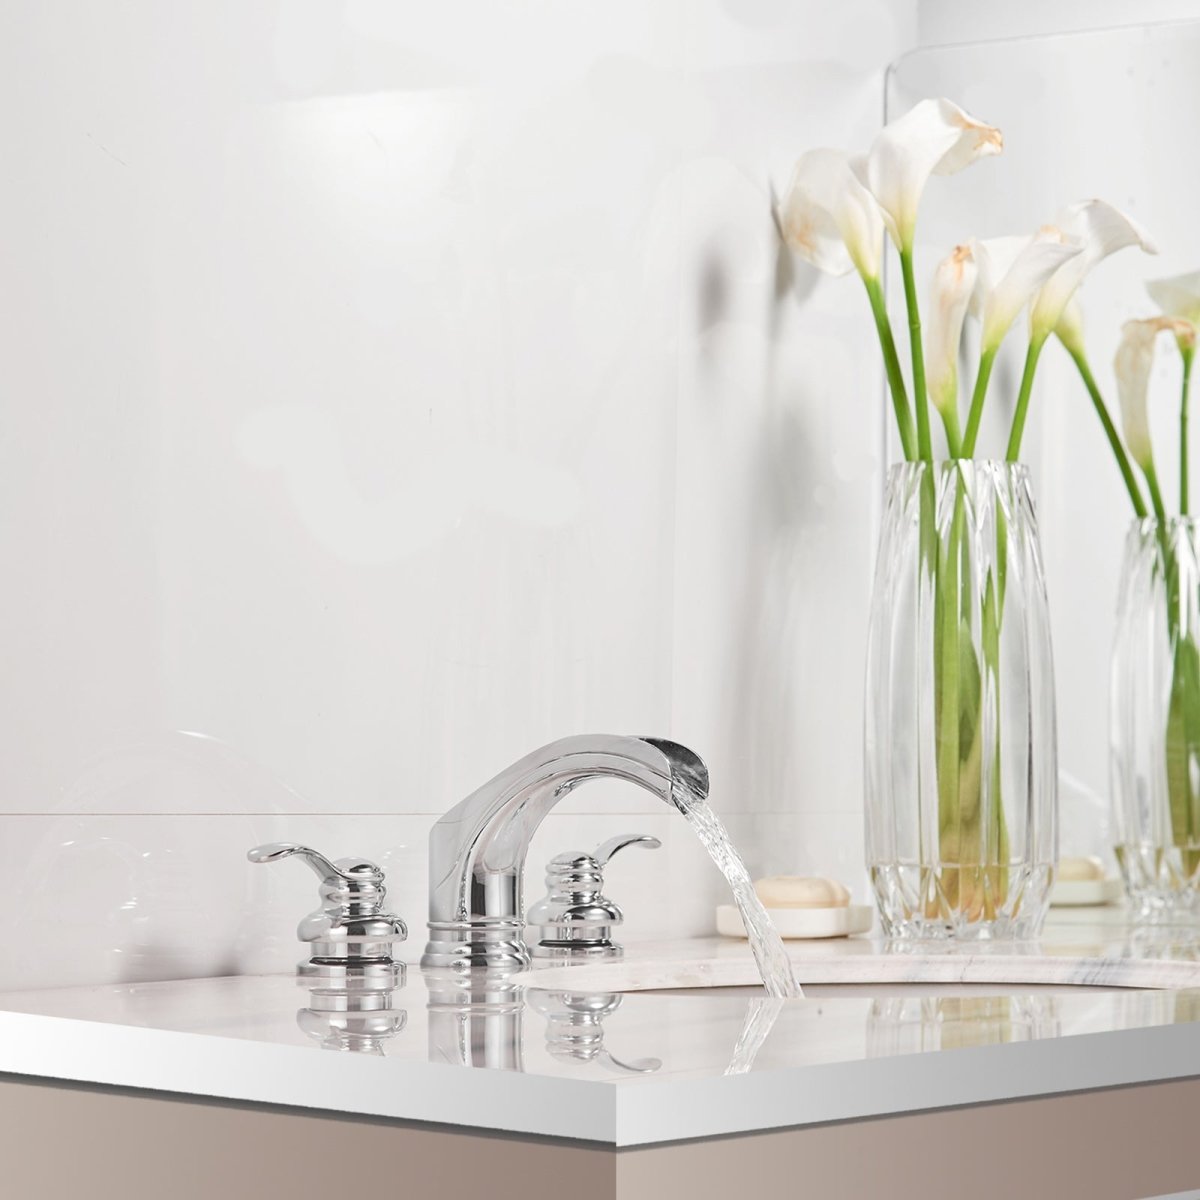 8 in Waterfall 2-Handle Bathroom Faucet with Drain Chrome - buyfaucet.com